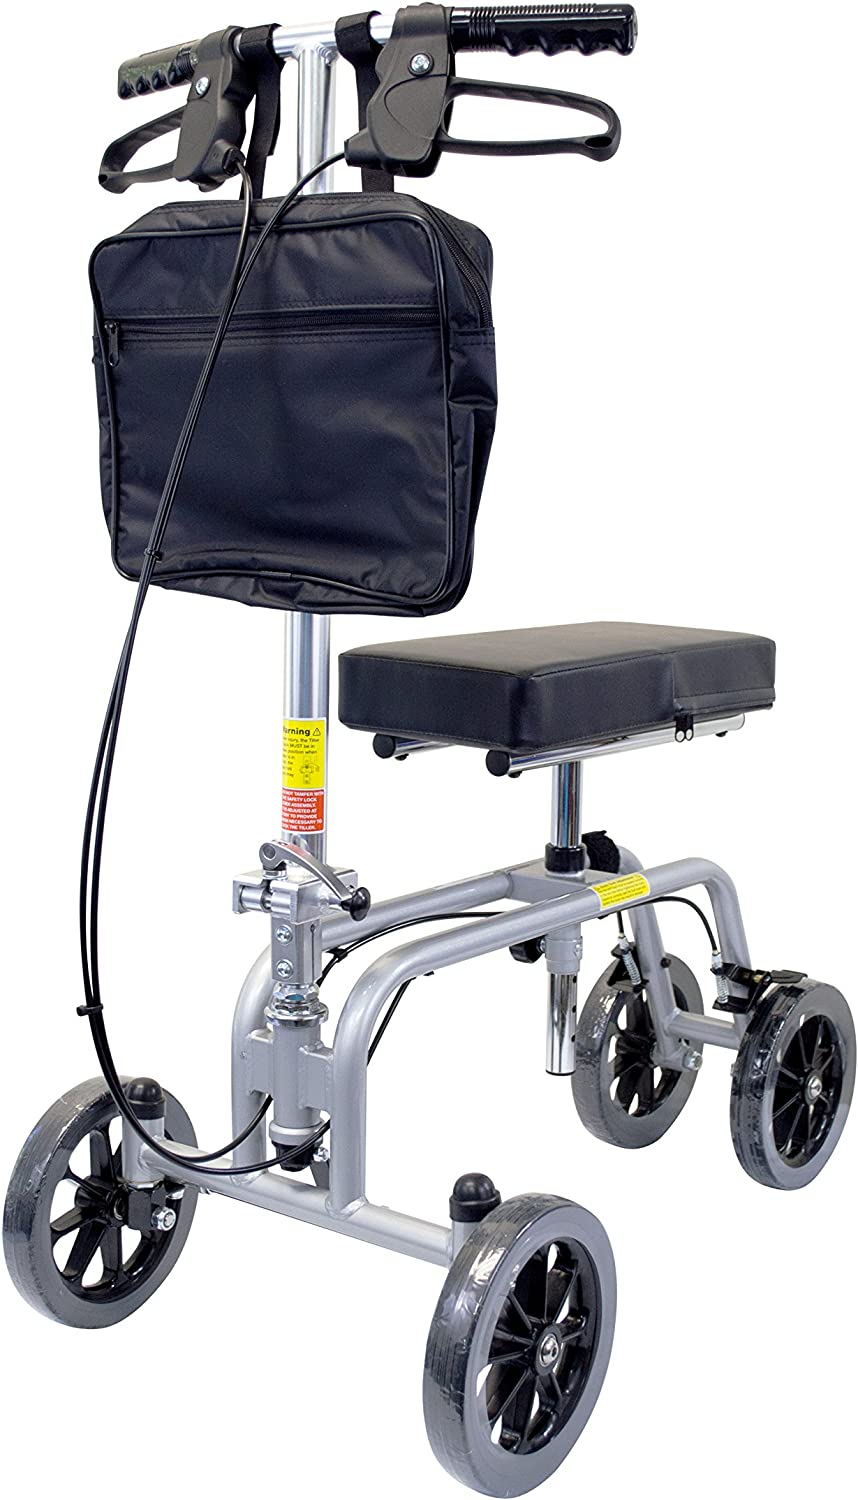 Essential Medical Supply Free Spirit Knee and Leg Walker with Patented Design, Unique Turning Mechanism, Extra Height Adjustability and 400lb Weight Capacity